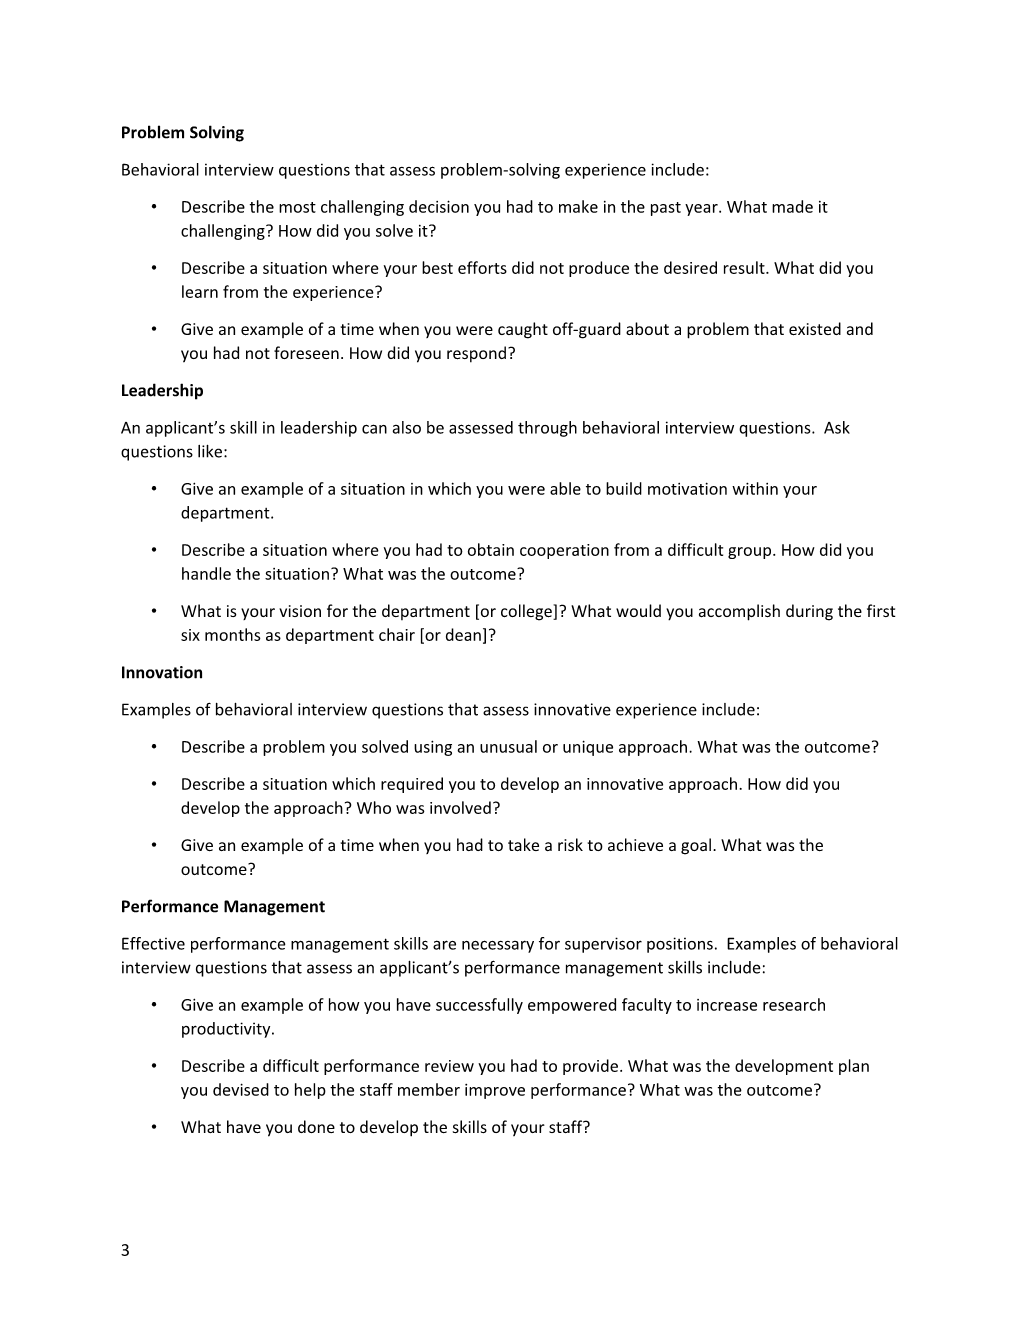 Guidelines for Behavioral-Based Interviewing